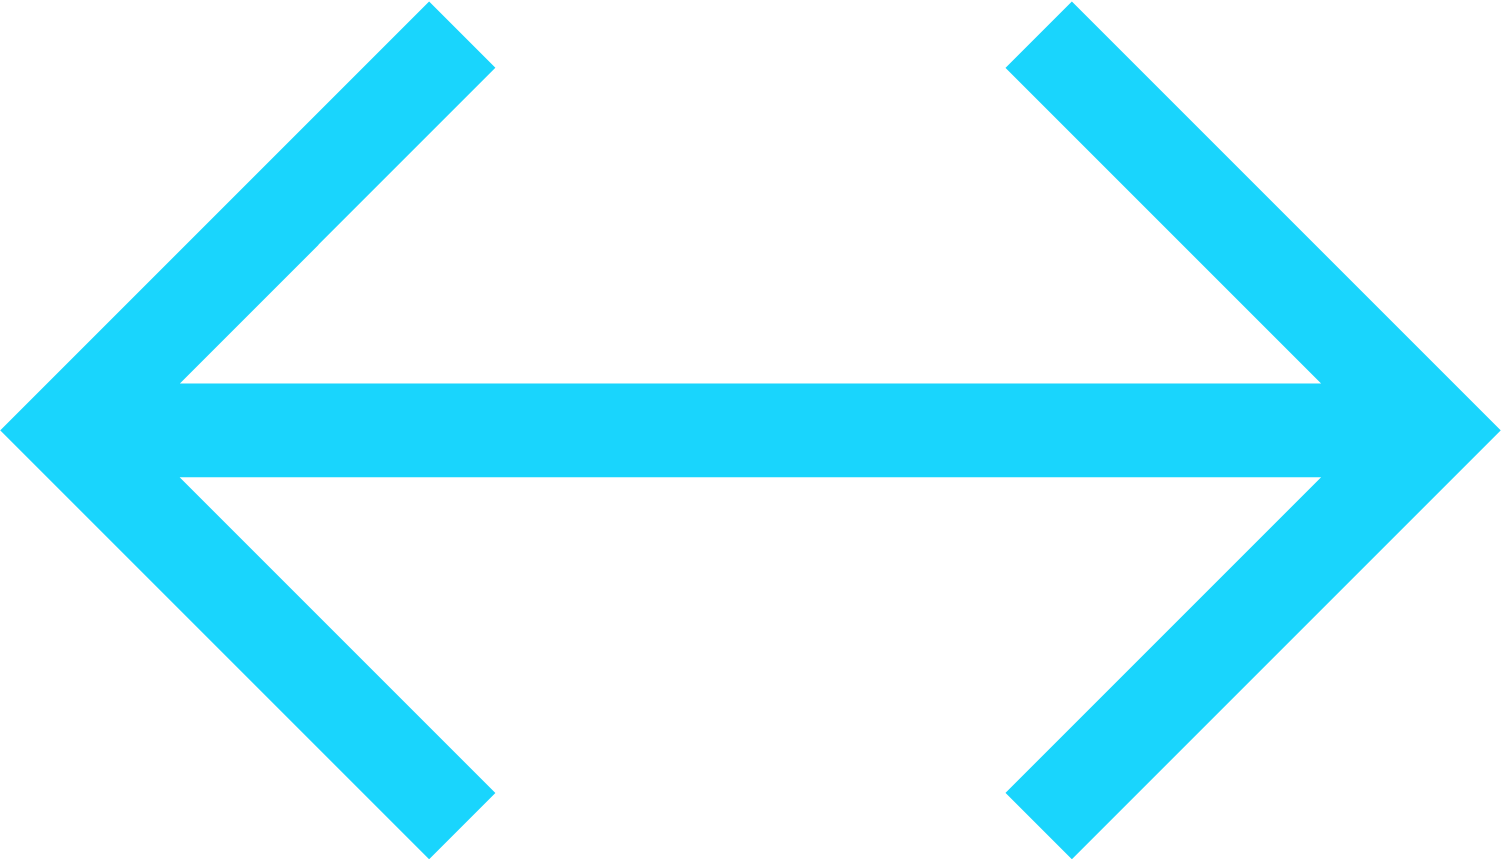 A bright cyan double-headed arrow, reminiscent of the sleek designs in Emfit technology, points left and right on a pristine white background.